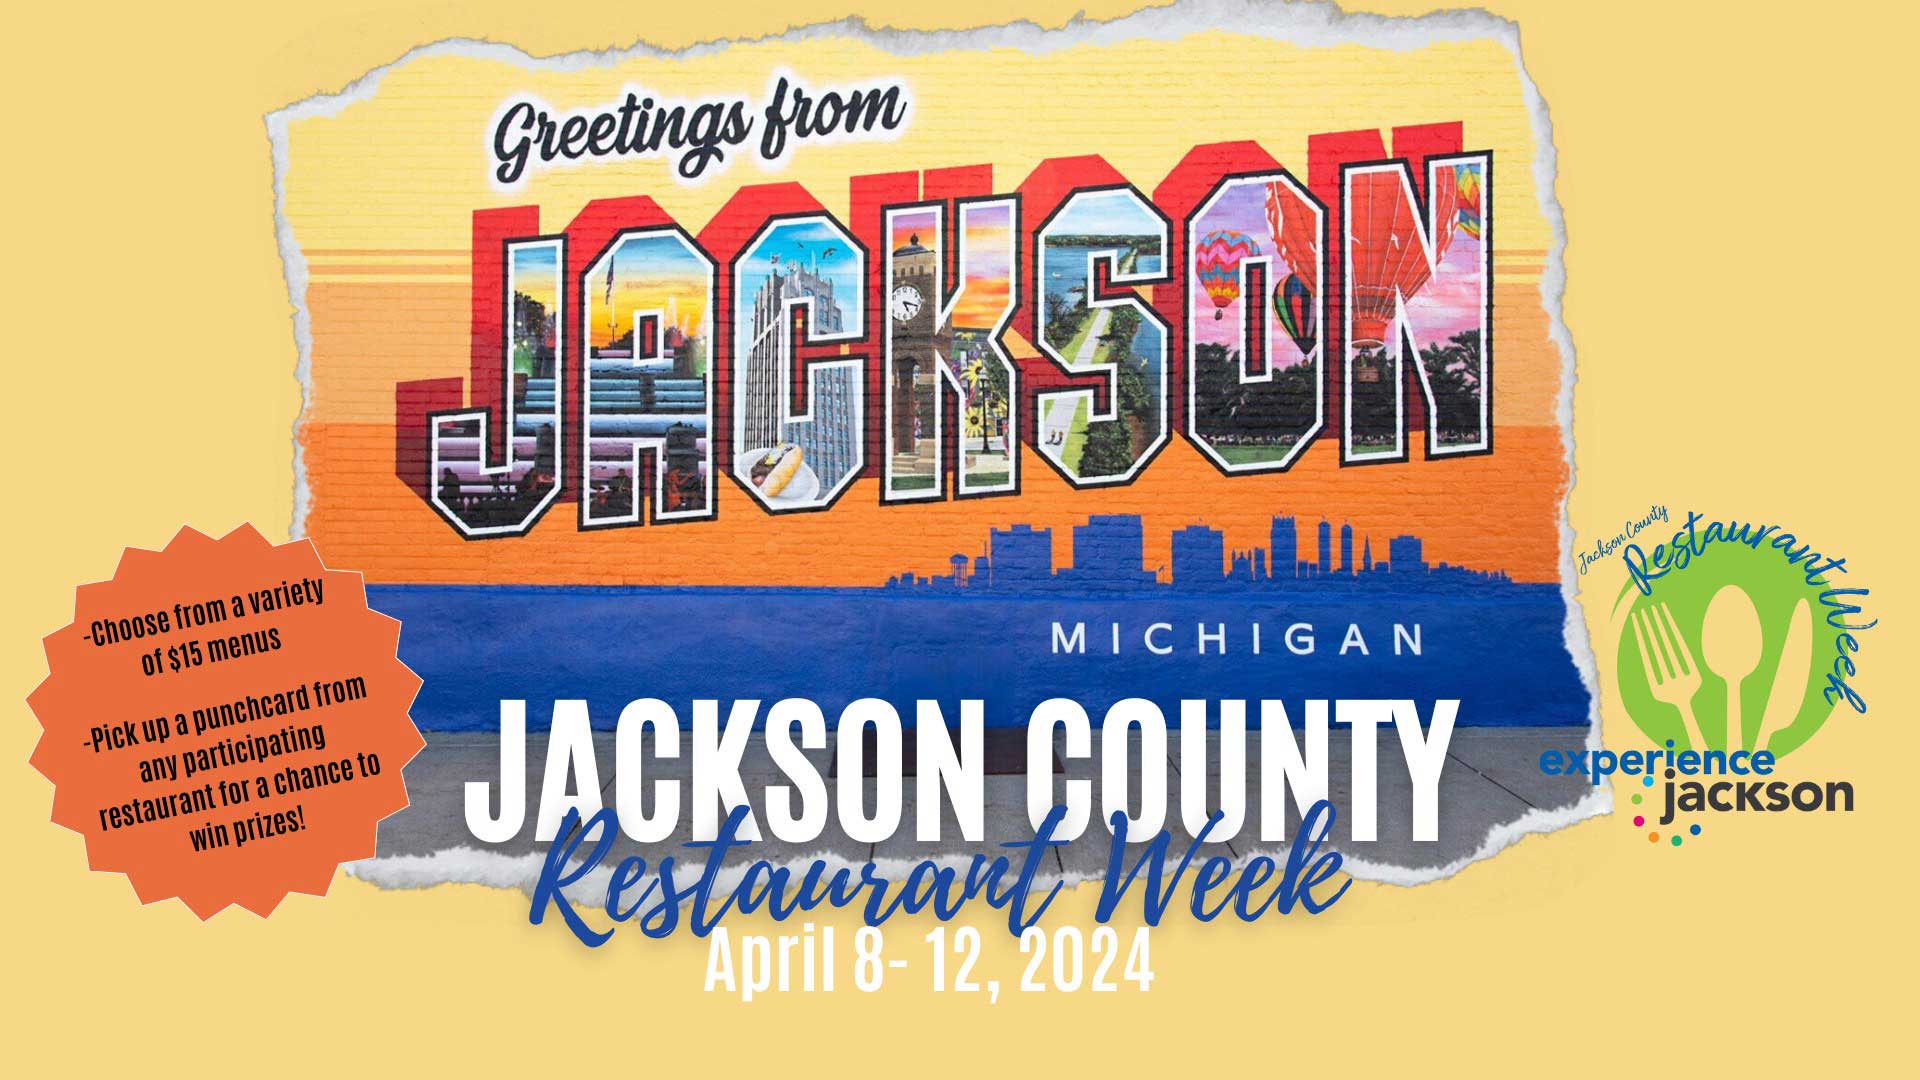 Experience Jackson Presents First-Ever Jackson County Restaurant Week